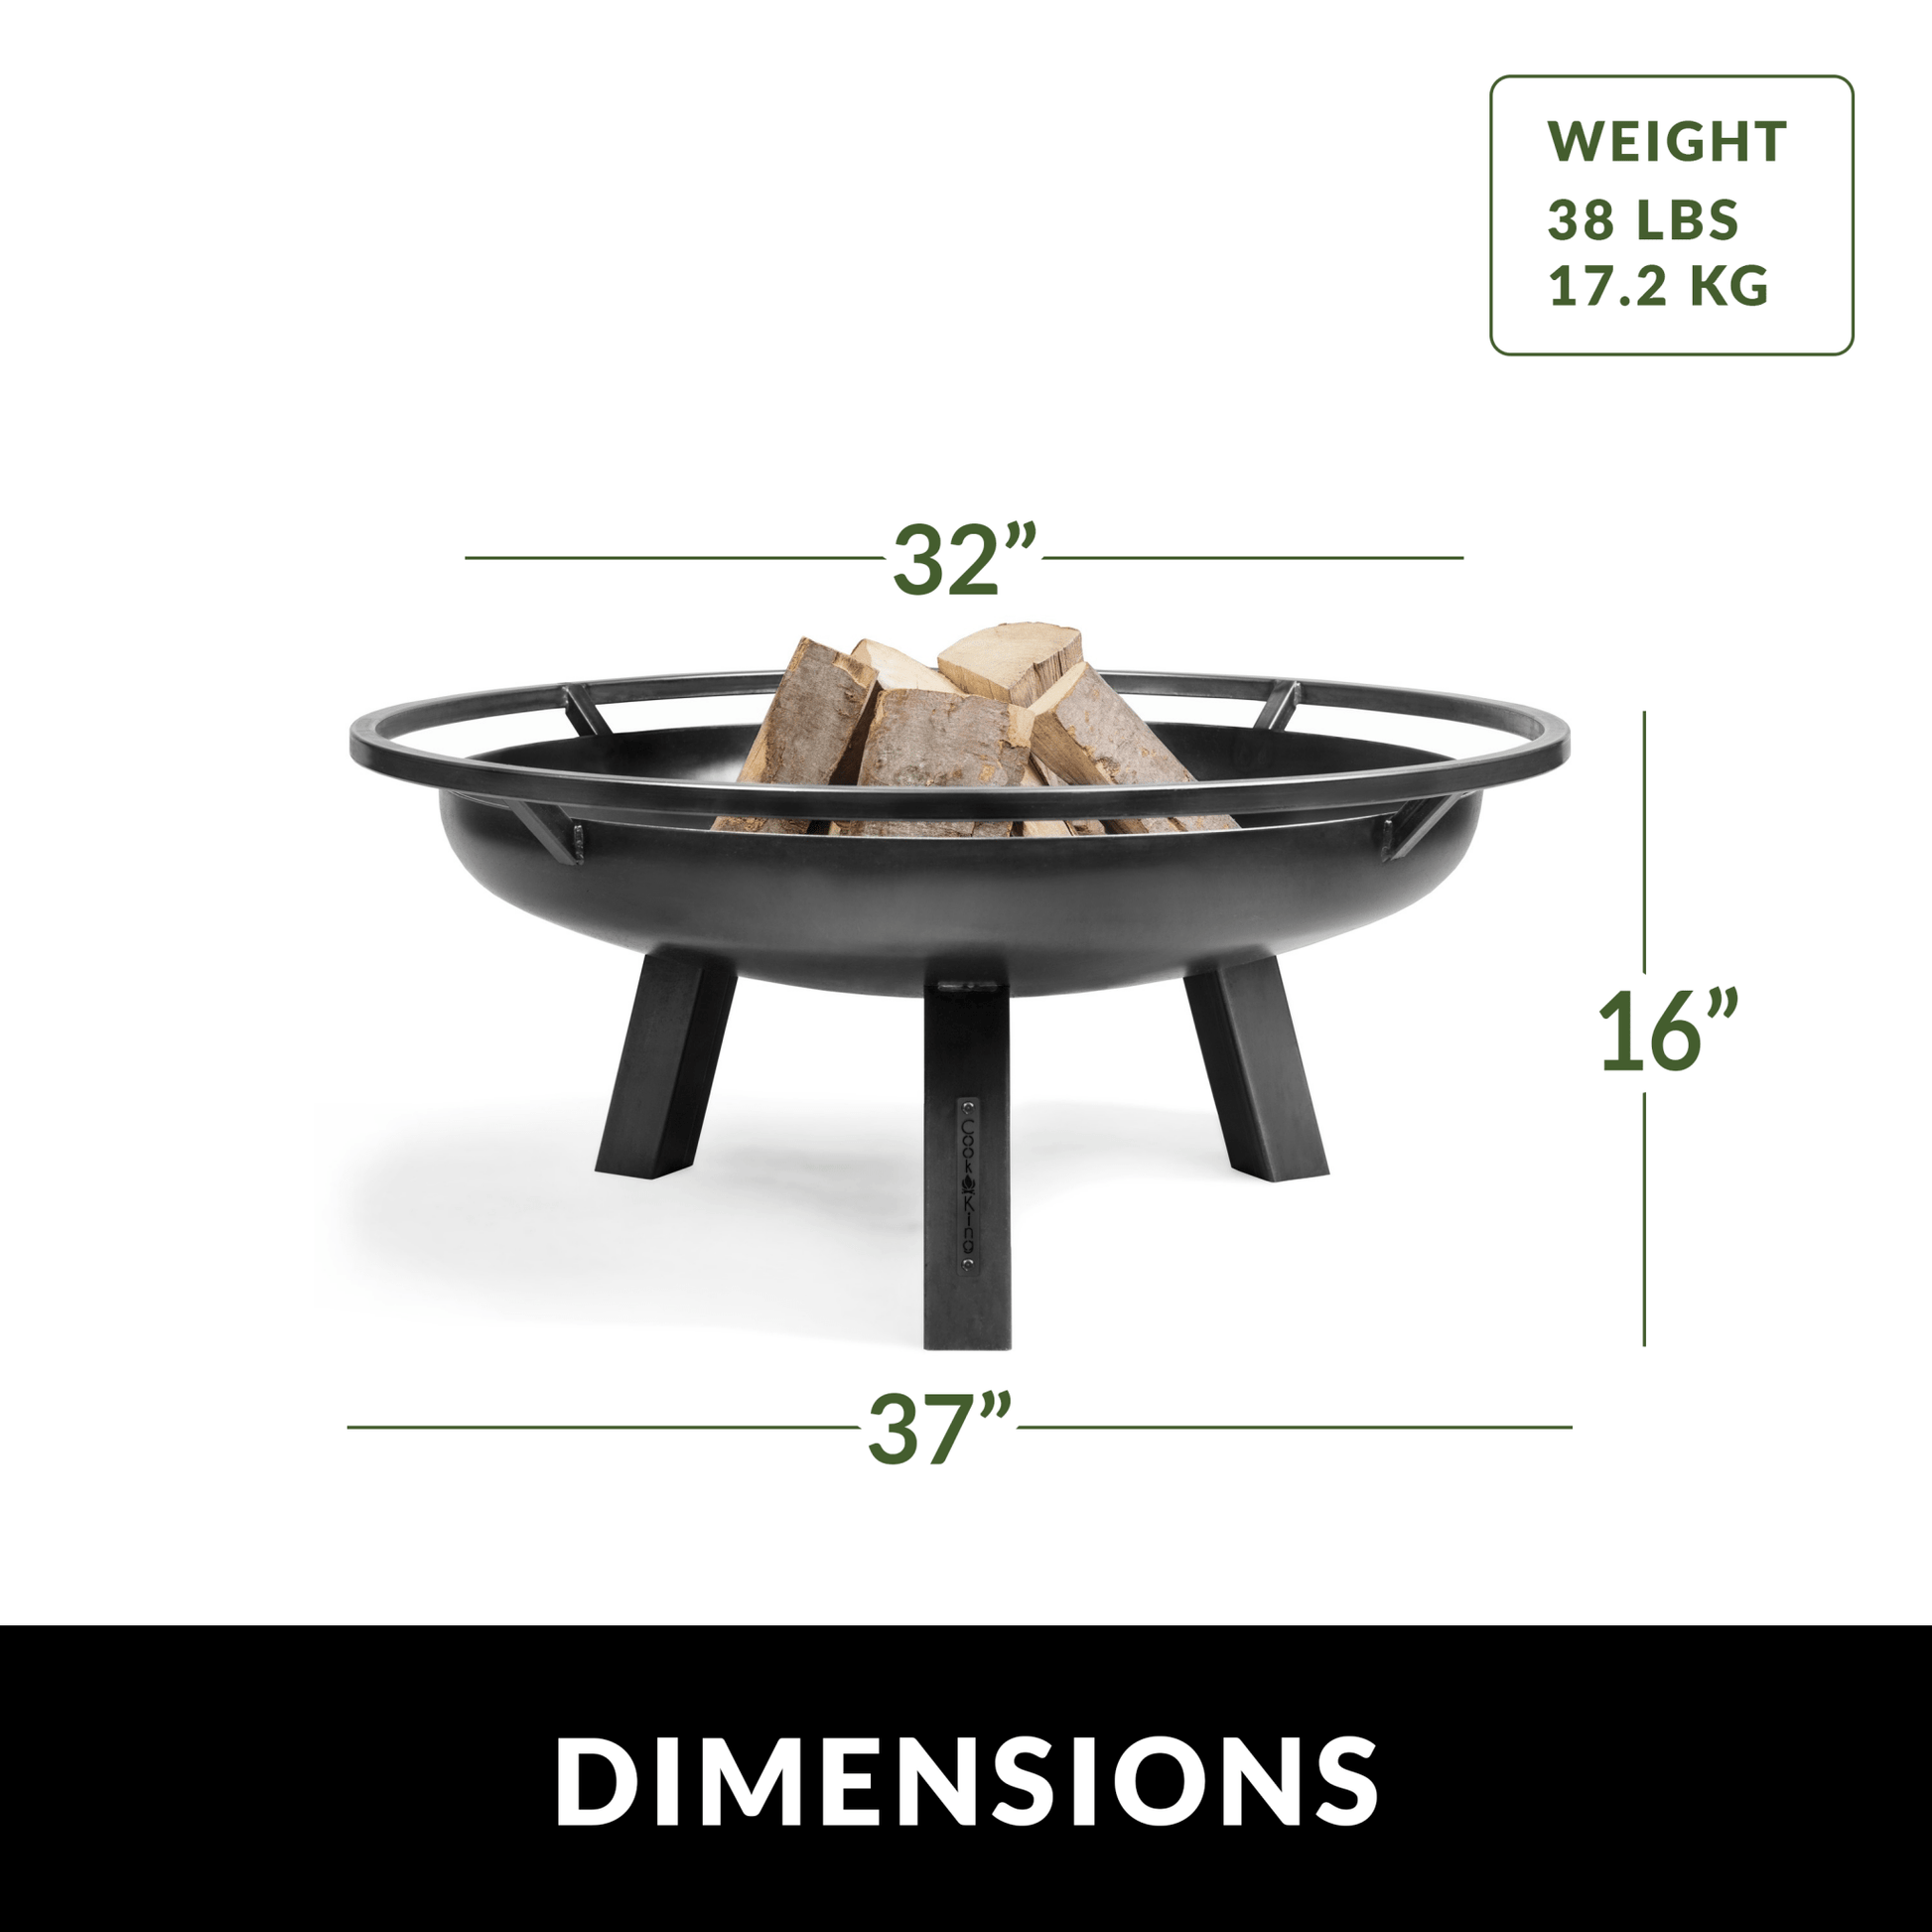 Porto 32" Fire Pit - Good Directions